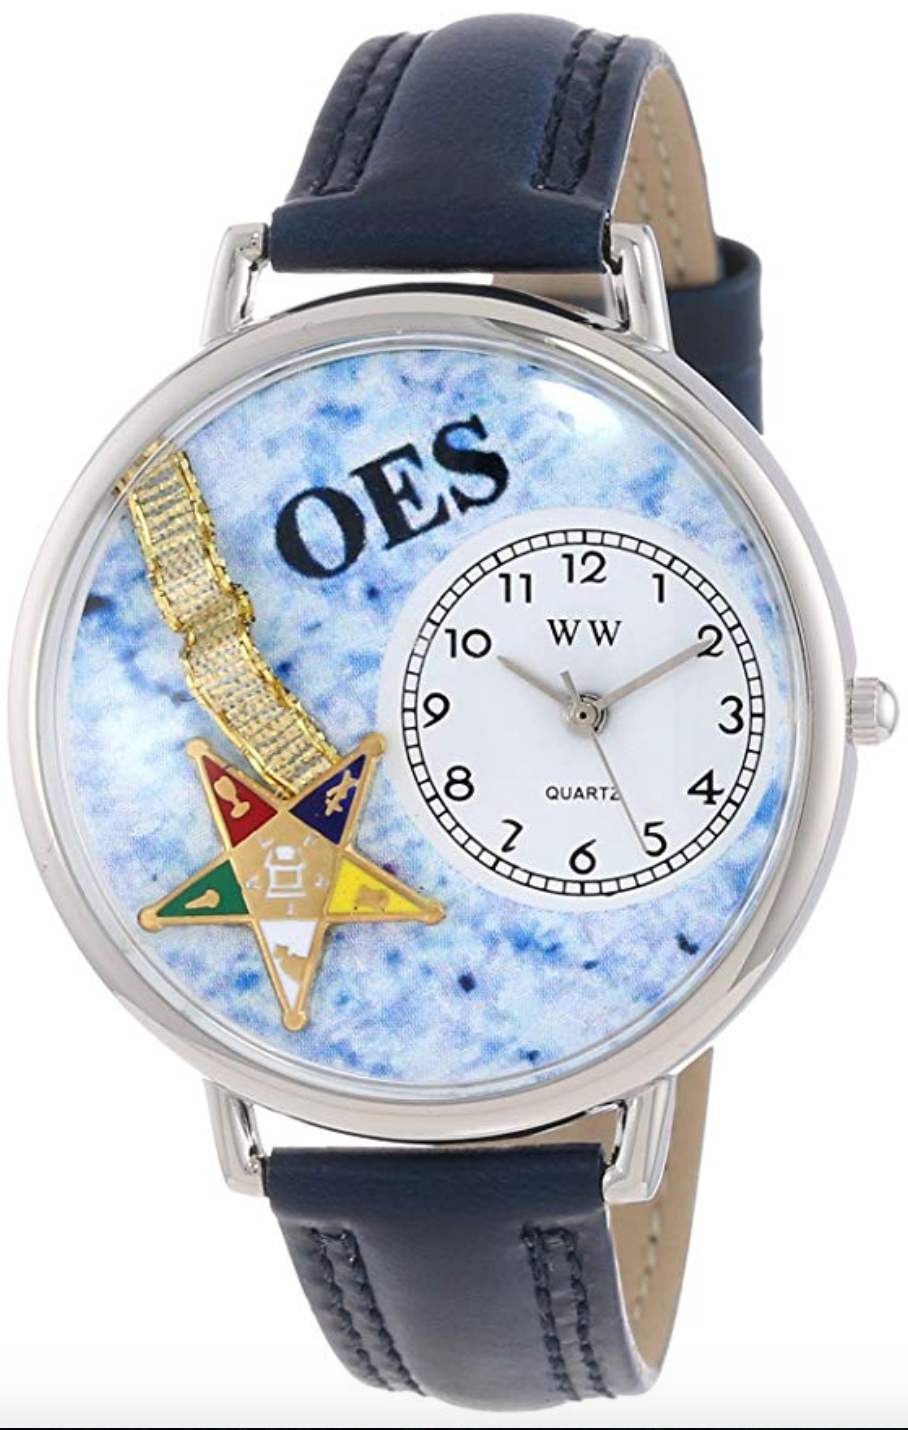 Leather Band Watch OES Gift Necklace Earrings Masonic Jewelry Order of The Eastern Star Women Mason